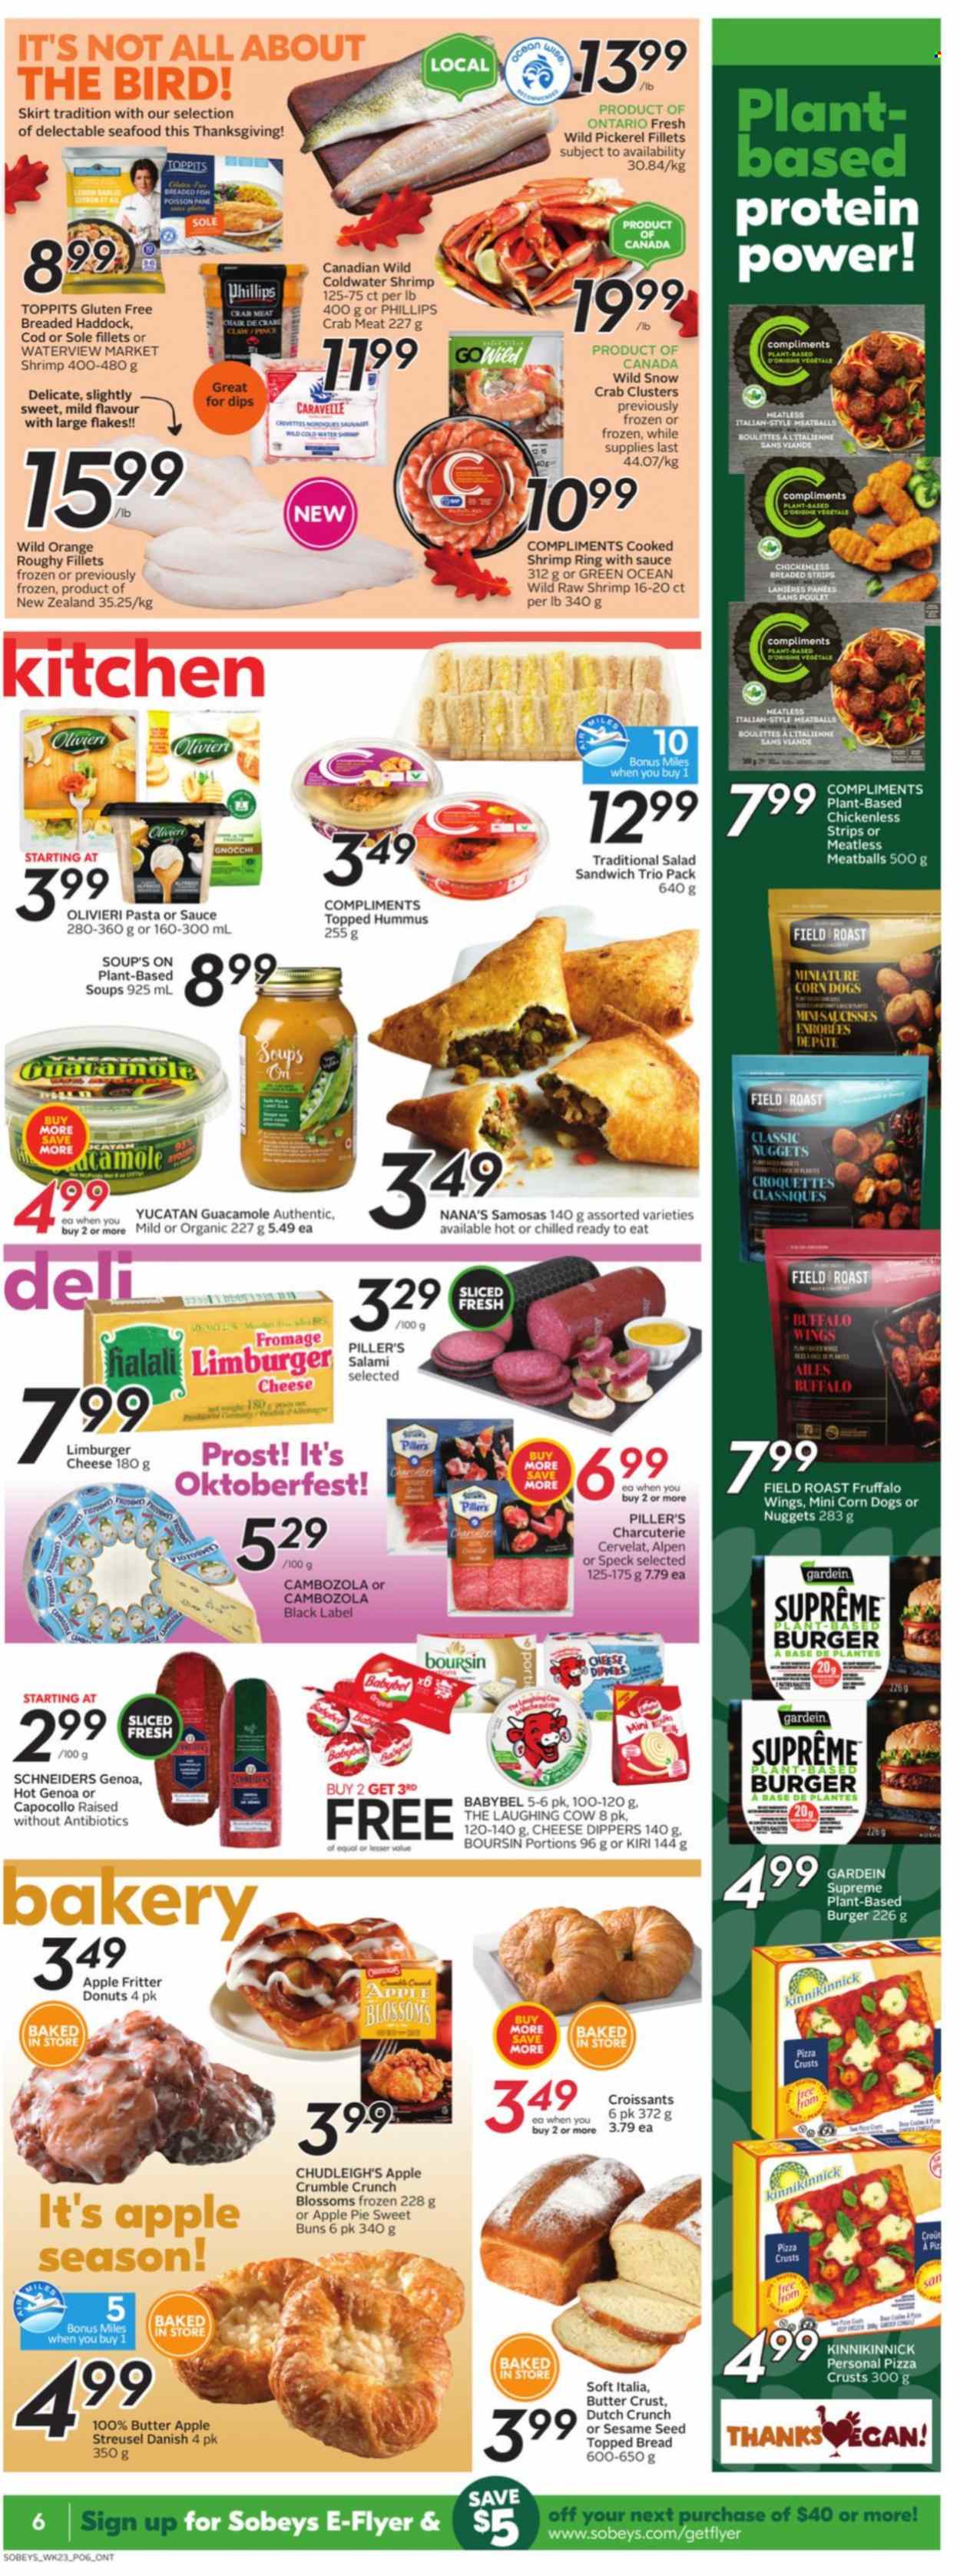 thumbnail - Sobeys Flyer - September 30, 2021 - October 06, 2021 - Sales products - bread, pie, croissant, buns, apple pie, donut, salad, cod, crab meat, haddock, seafood, crab, fish, shrimps, walleye, pizza, meatballs, sandwich, soup, nuggets, hamburger, breaded fish, salami, hummus, guacamole, Kiri, The Laughing Cow, Babybel, butter, strips, potato croquettes, sesame seed, Nana, gnocchi, oranges. Page 6.